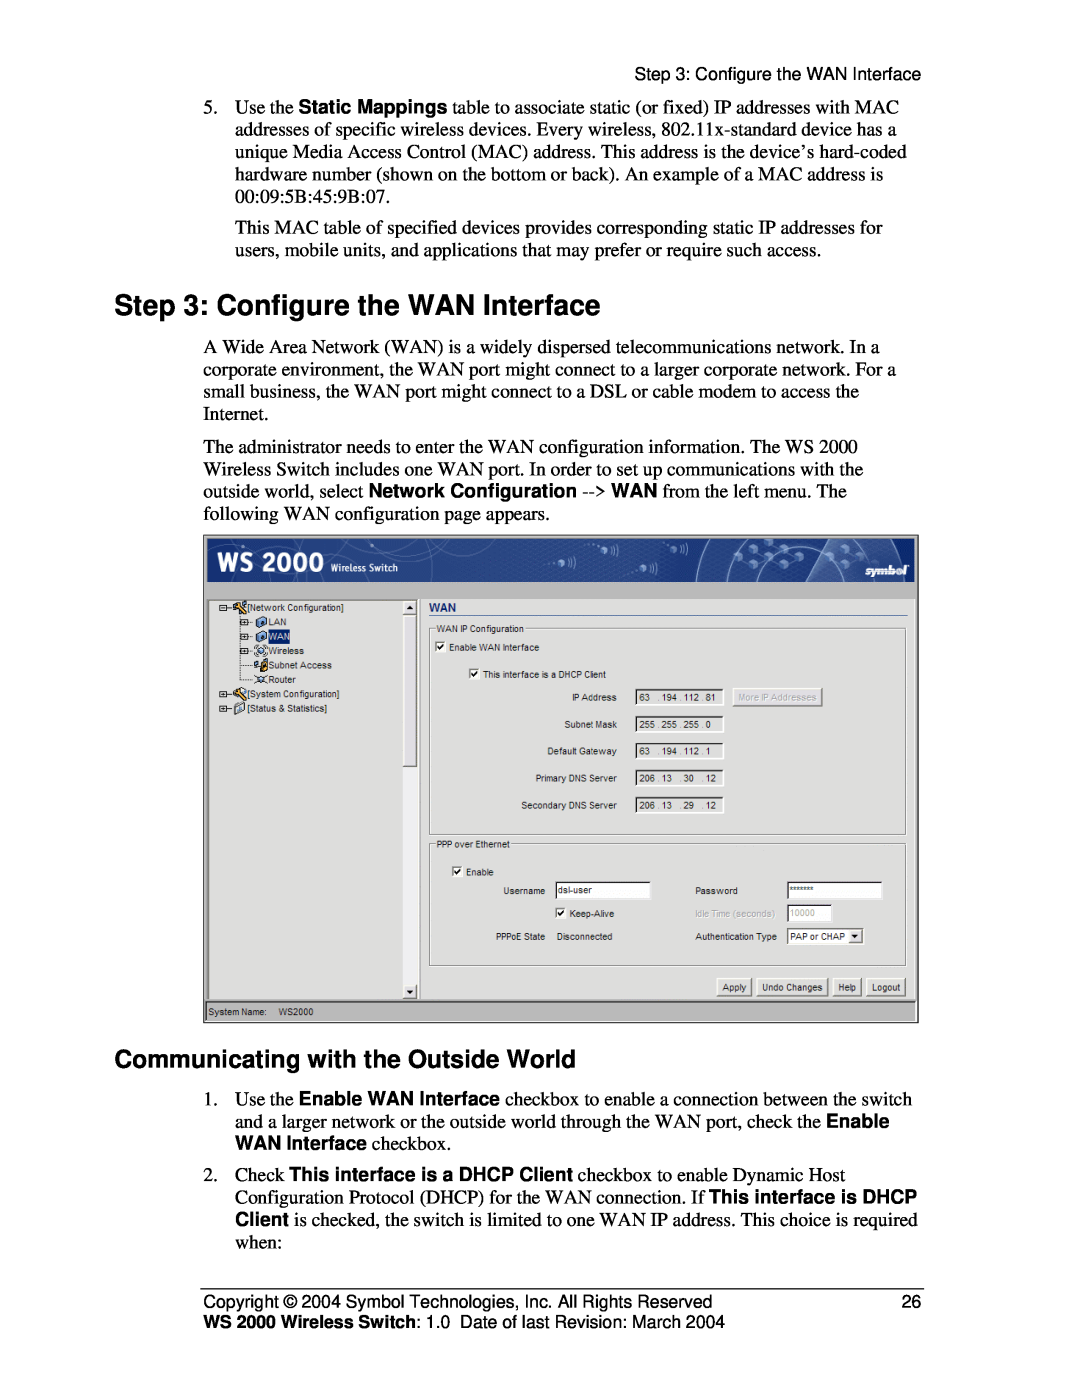 Symbol Technologies WS 2000 manual Configure the WAN Interface, Communicating with the Outside World 